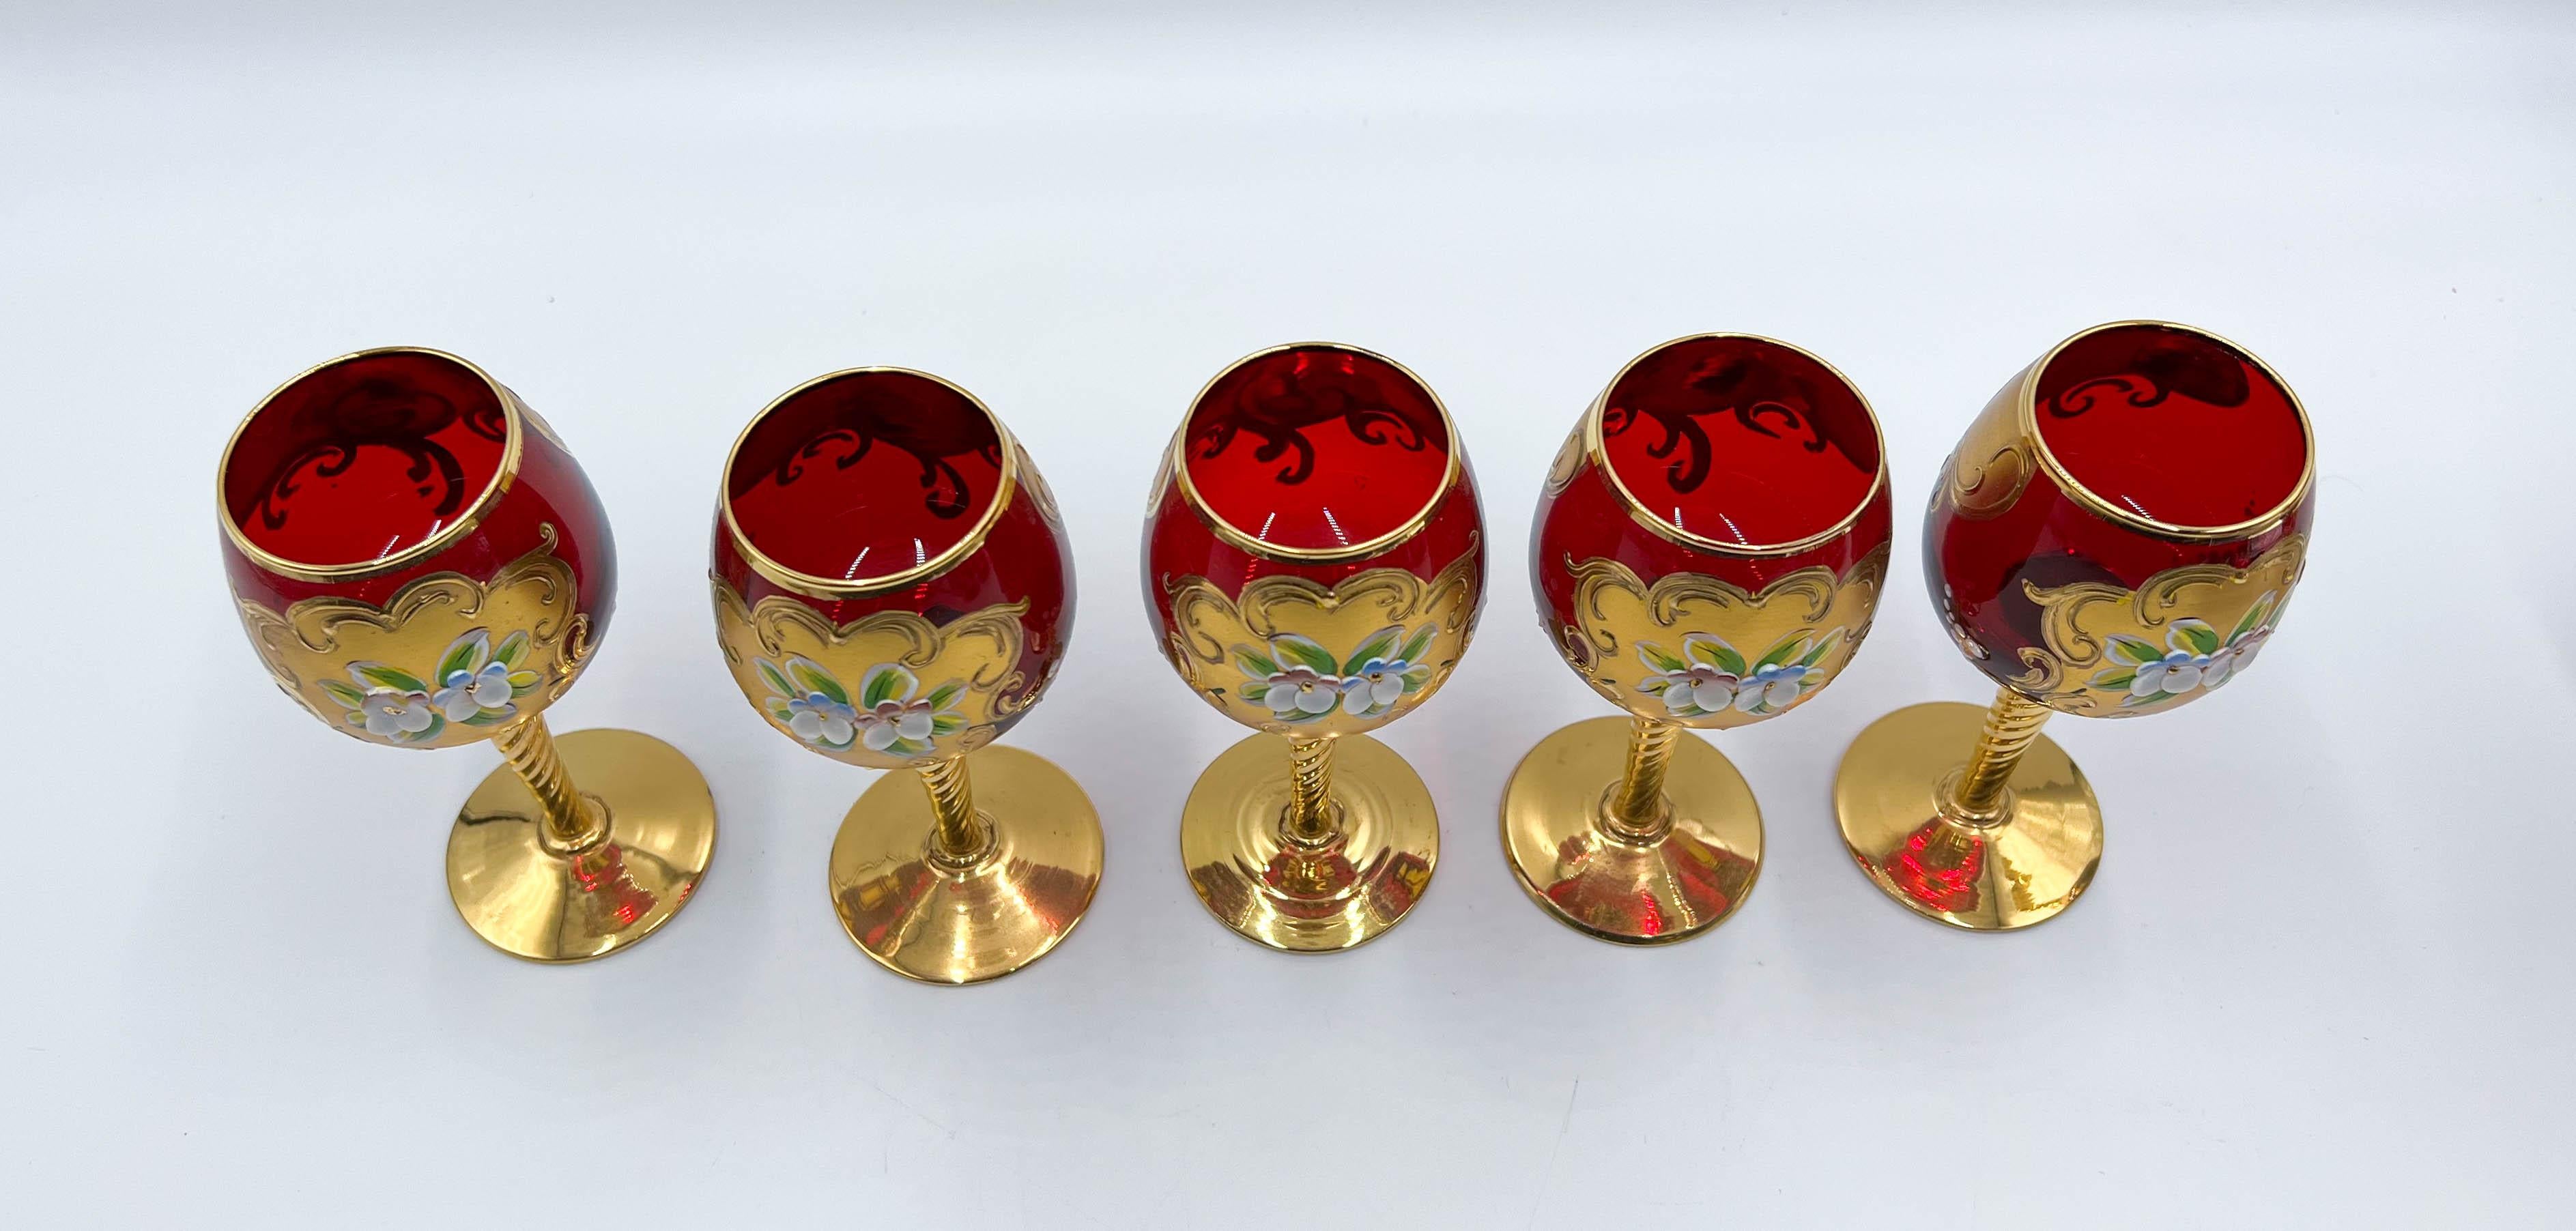 Early 20th Century Vintage Tre Fuochi Venetian Murano Glass Ruby Red Goblets and Pitcher, 8 Pc Set For Sale